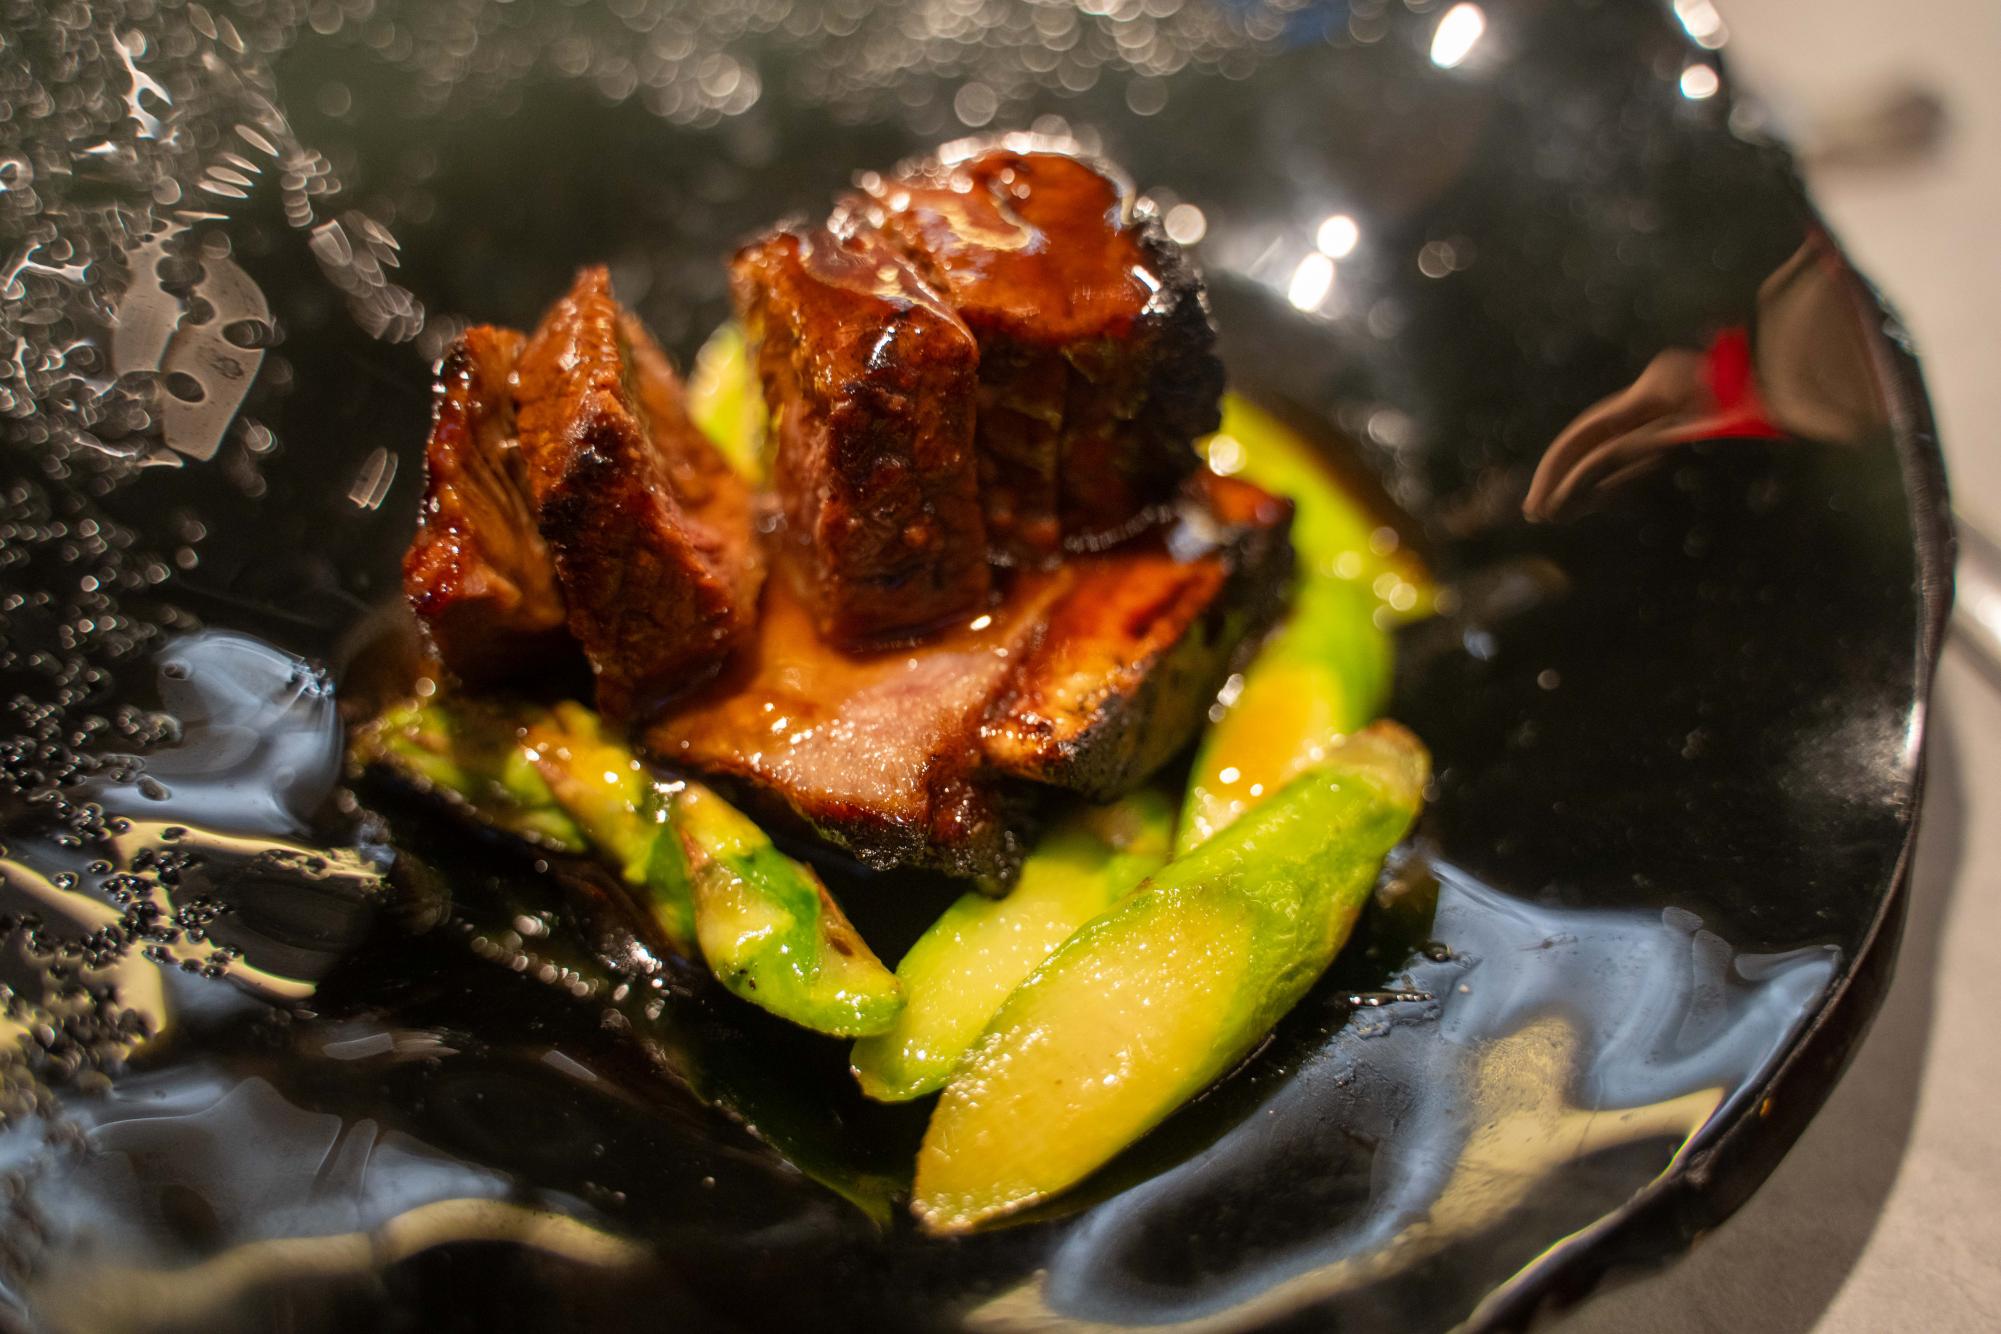 Sliced short ribs covered in sauce on top of avocado slices.